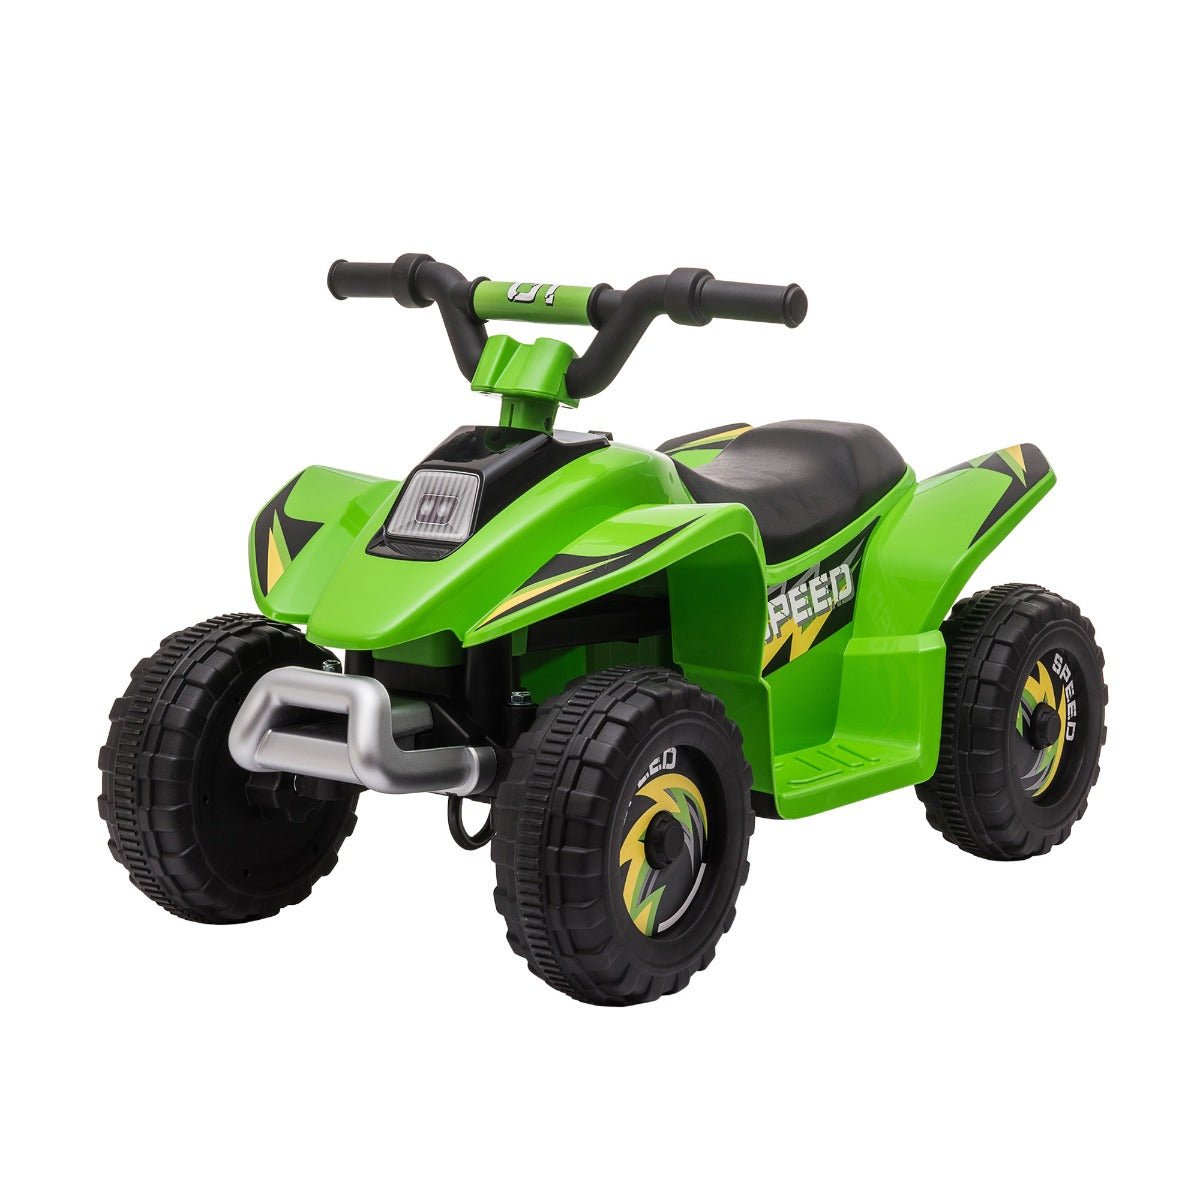 Toys and Games-6V Kids ATV Children Ride on Car, Electric Quad Toy Battery Powered Vehicle with Forward/ Reverse Switch for 18-36 Months Old Toddlers, Green - Outdoor Style Company